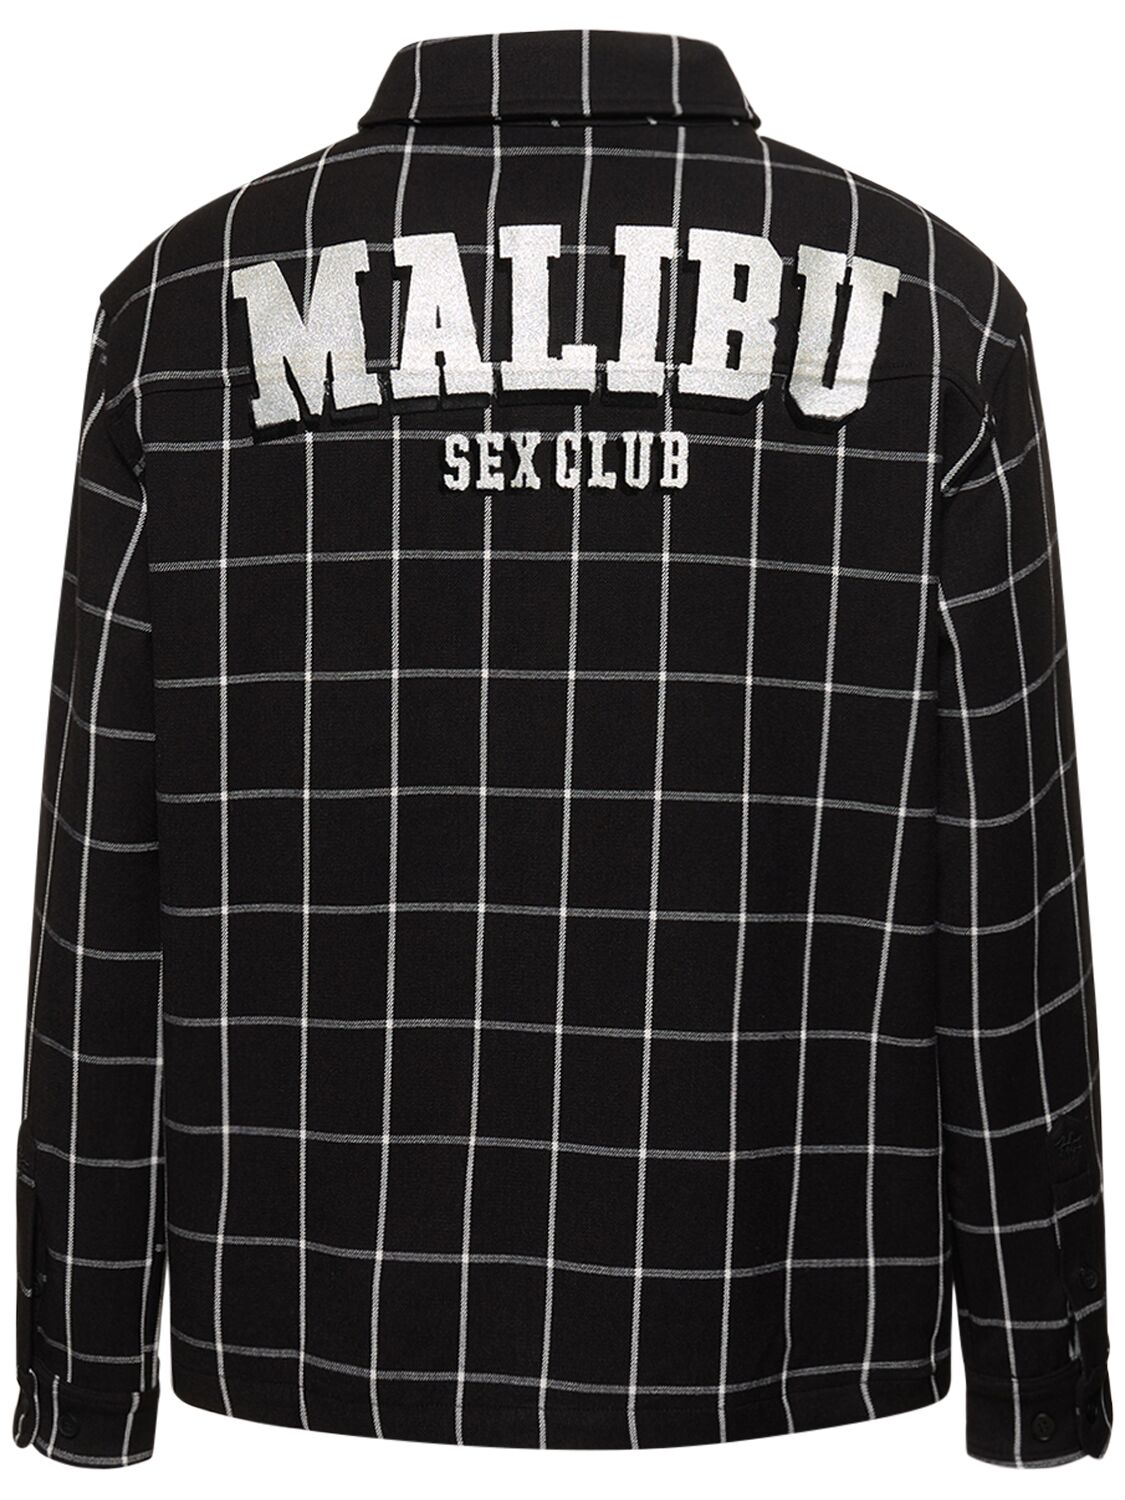 Image of Sex Club Flannel Shirt